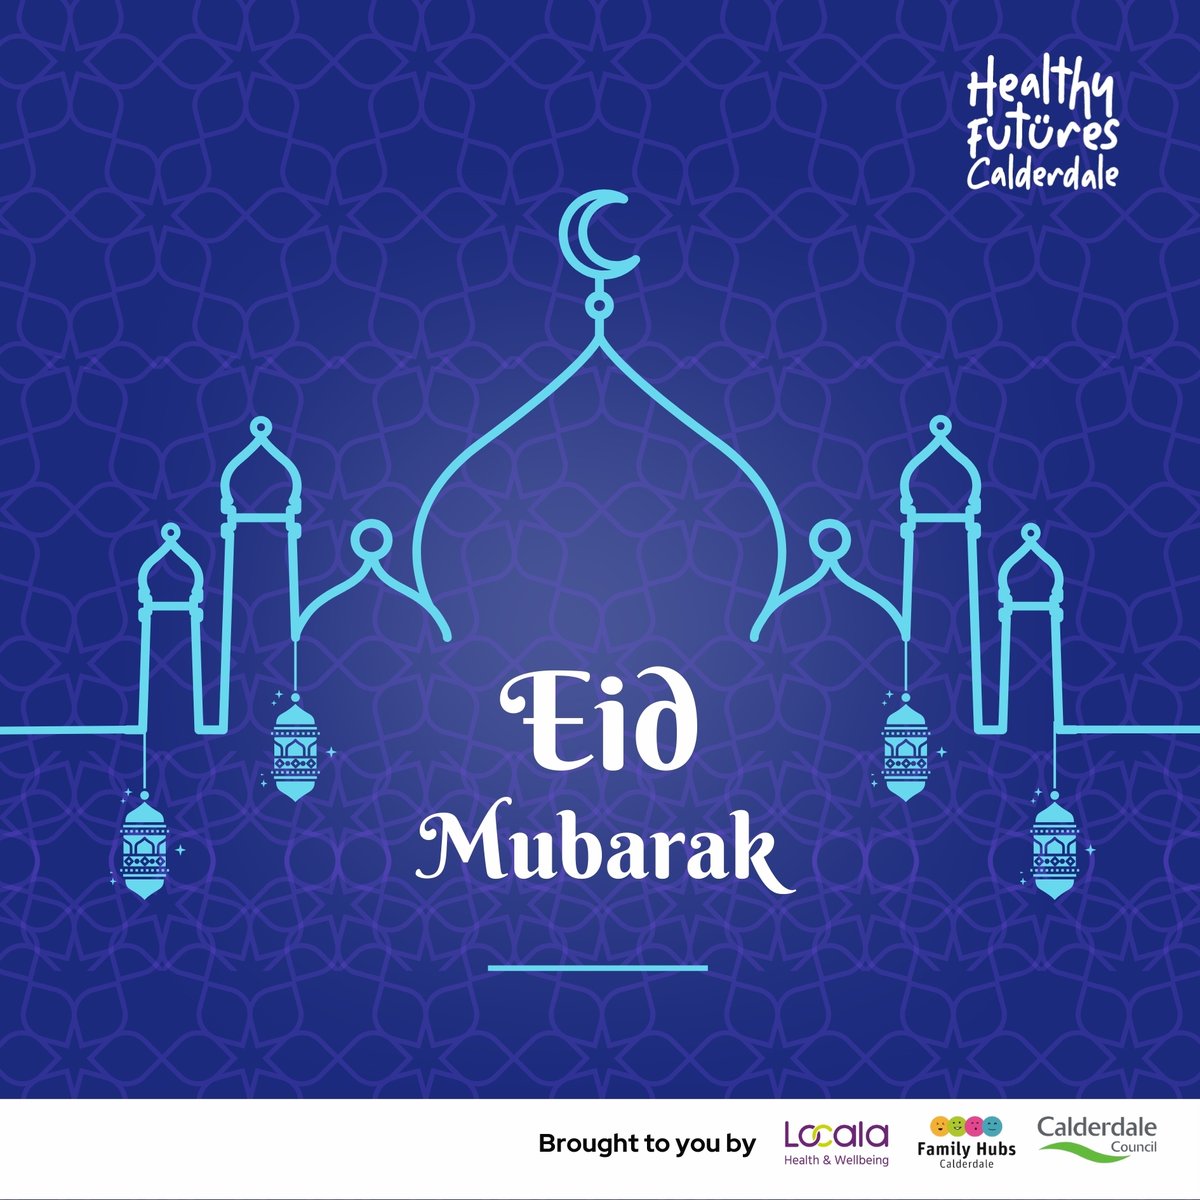 Wishing all celebrating in Calderdale a happy Eid! May your day be filled with joy, peace, and precious moments with loved ones. #EidMubarak !🌙✨